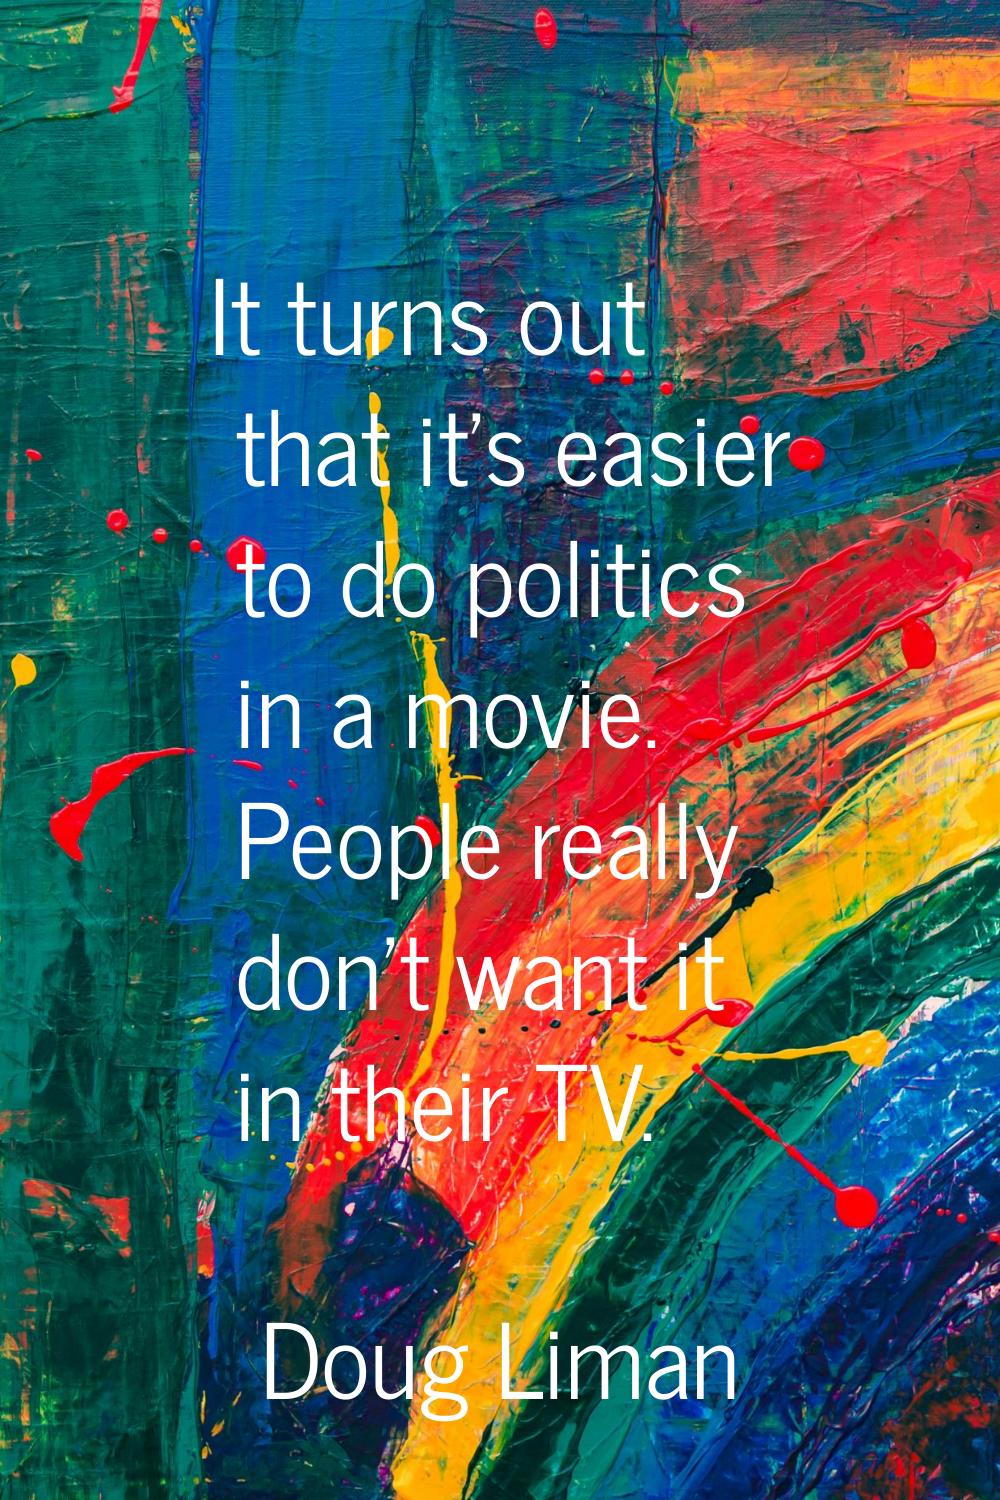 It turns out that it's easier to do politics in a movie. People really don't want it in their TV.